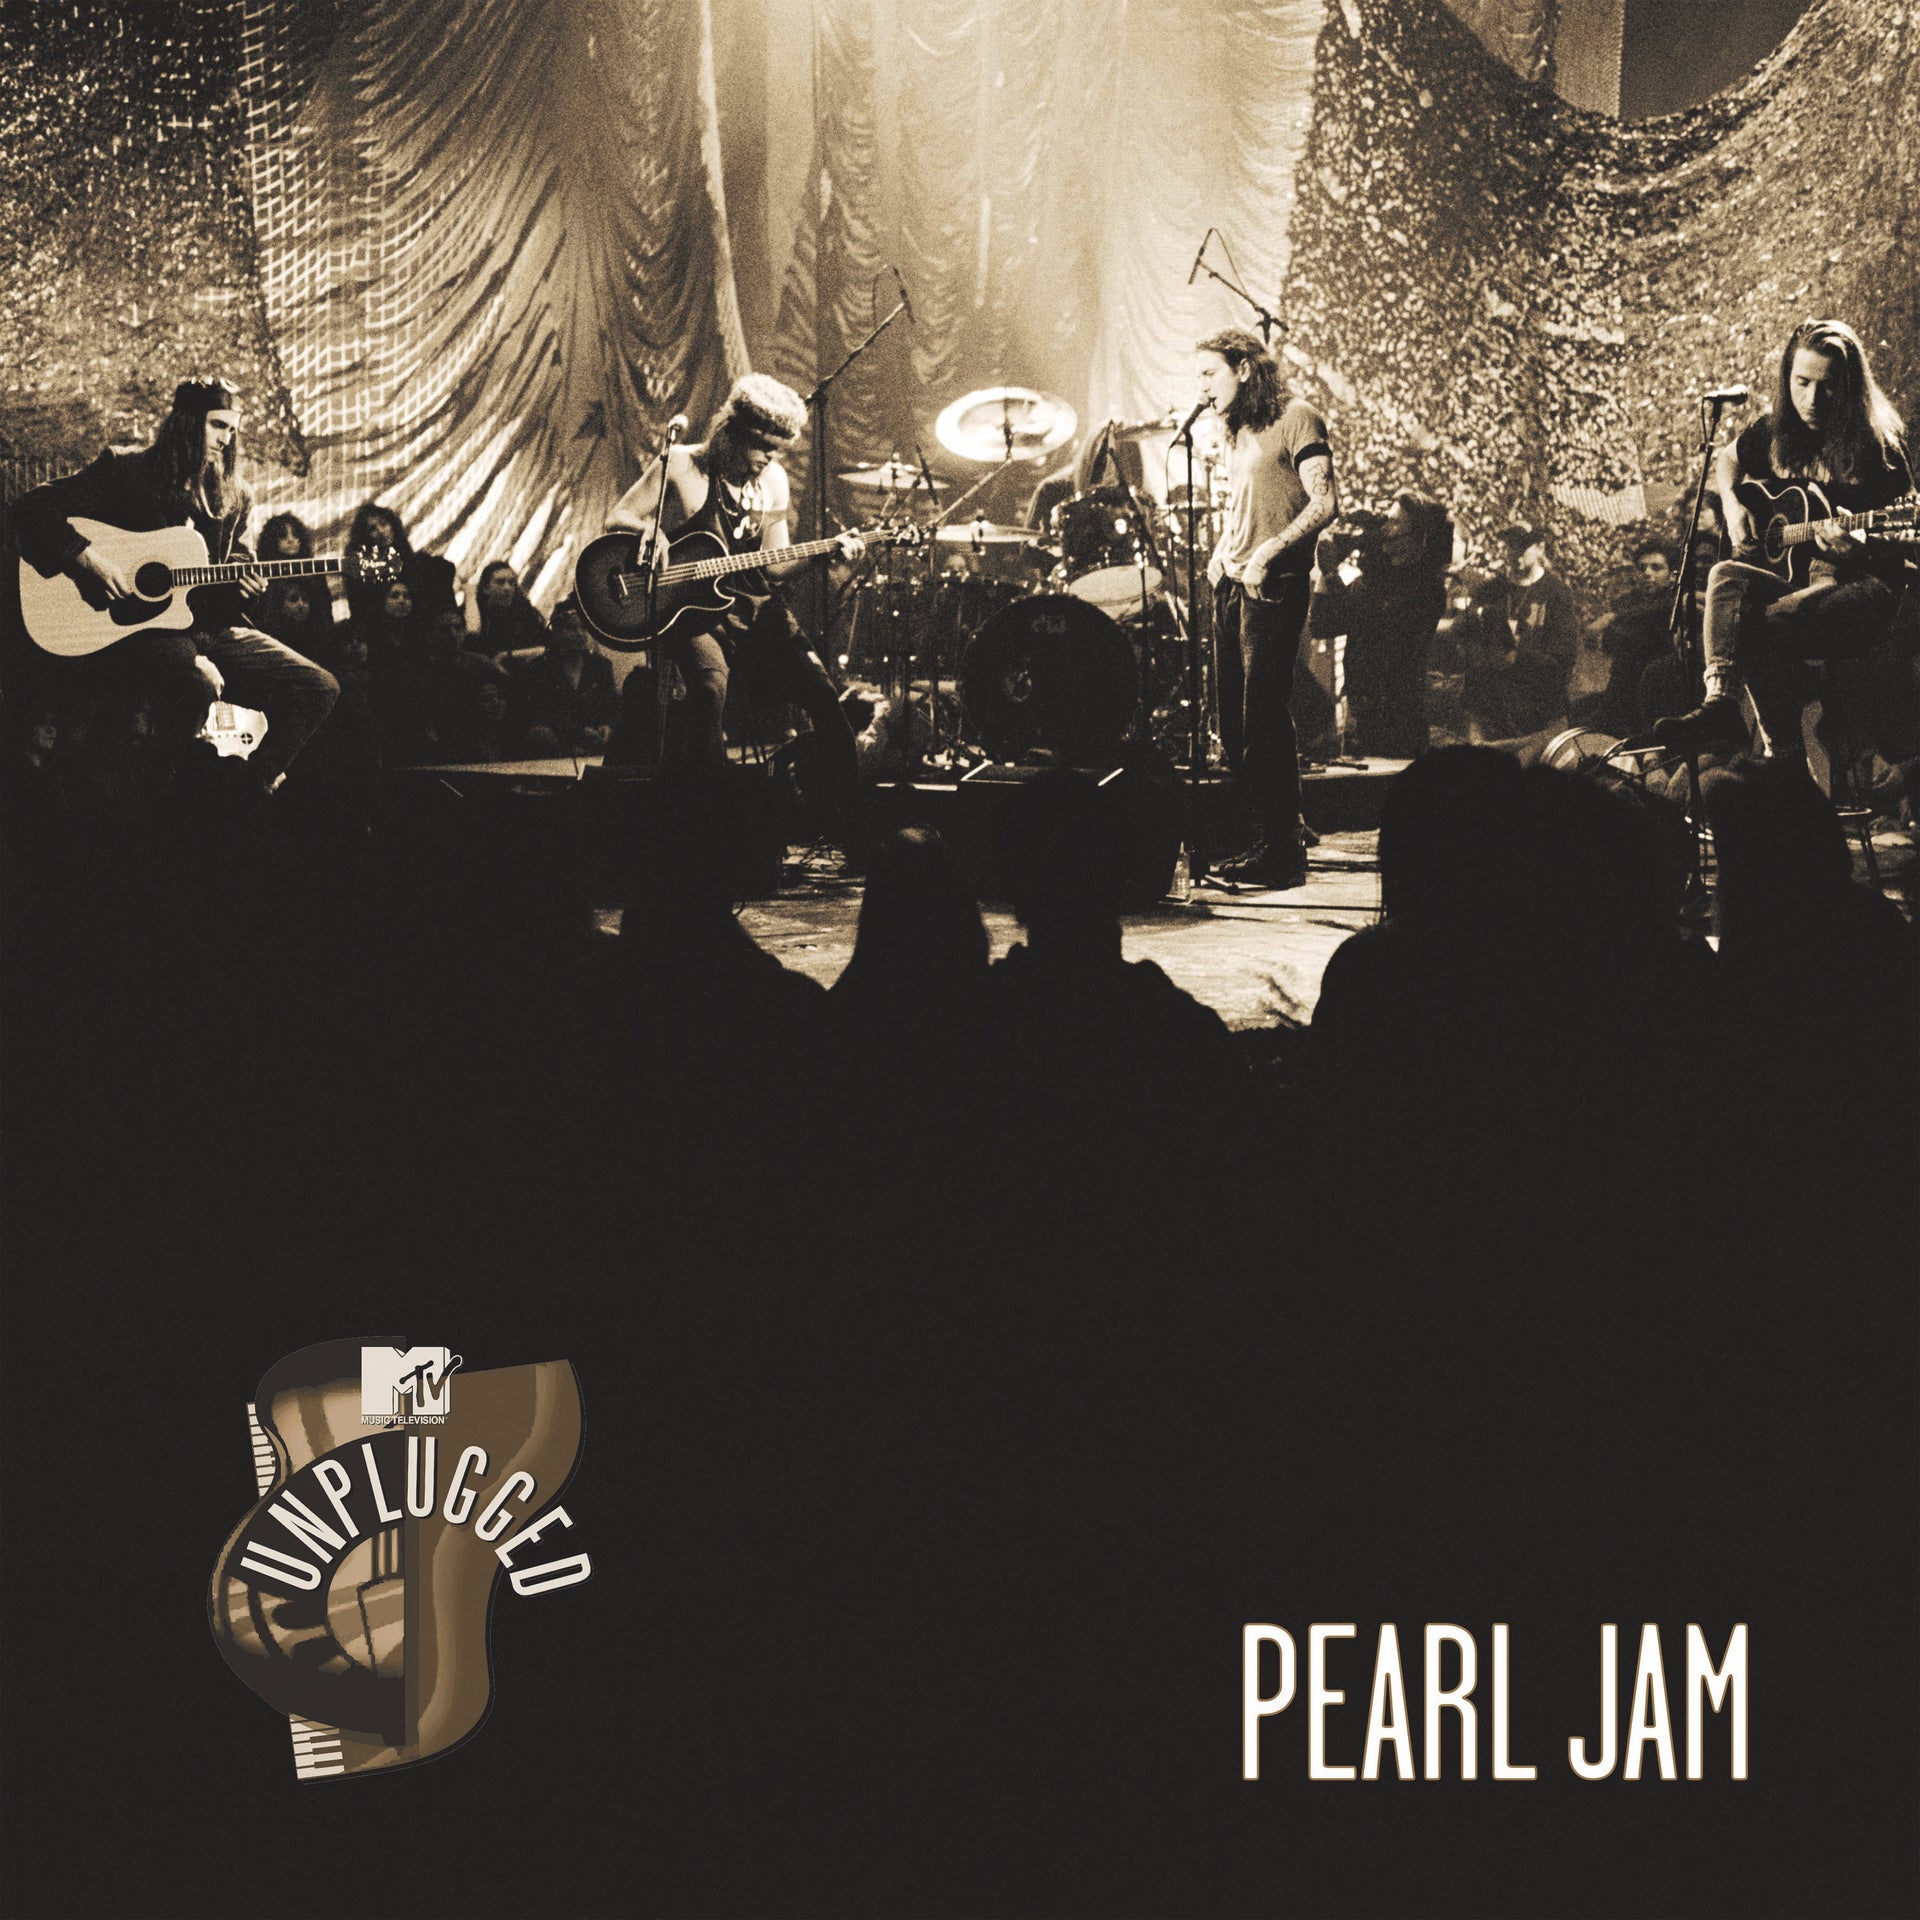 Pearl Jam - Mtv Unplugged, March 16, 1992 (BF2019)